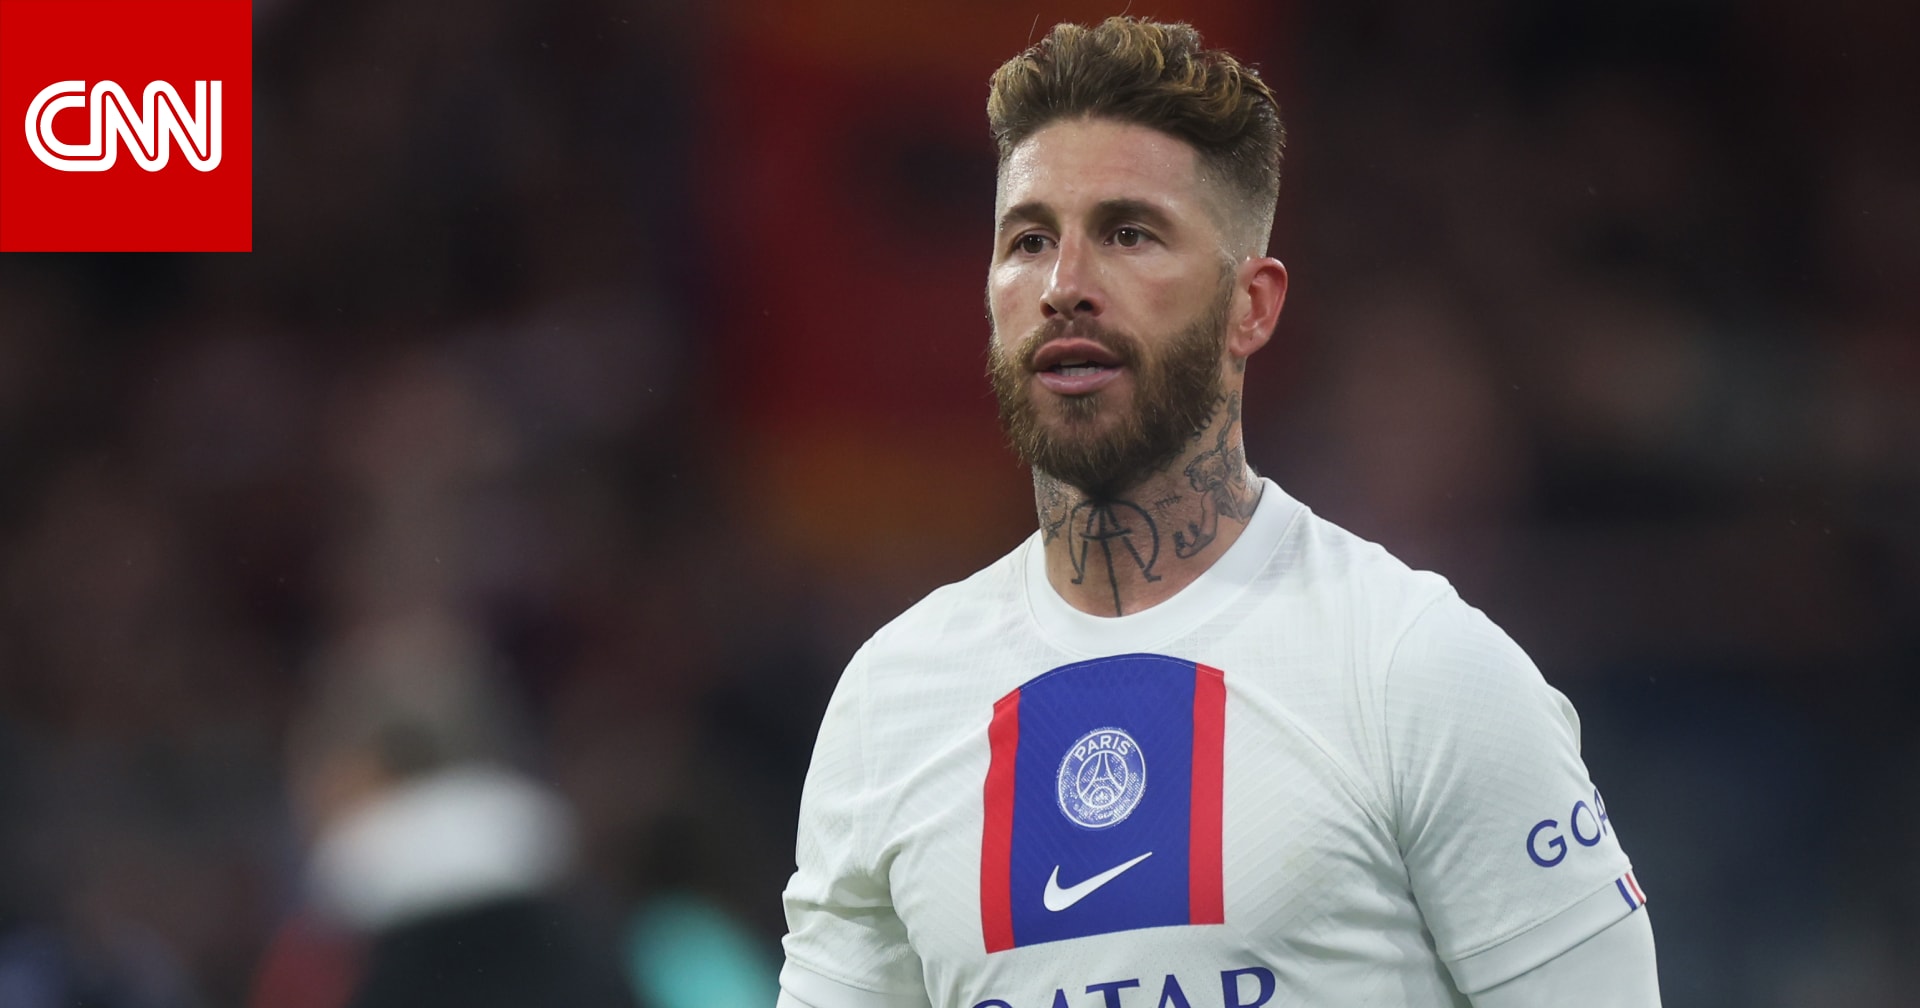 Sergio Ramos bids farewell to Paris Saint-Germain with “influential” news.. What were his most significant achievements at the club?